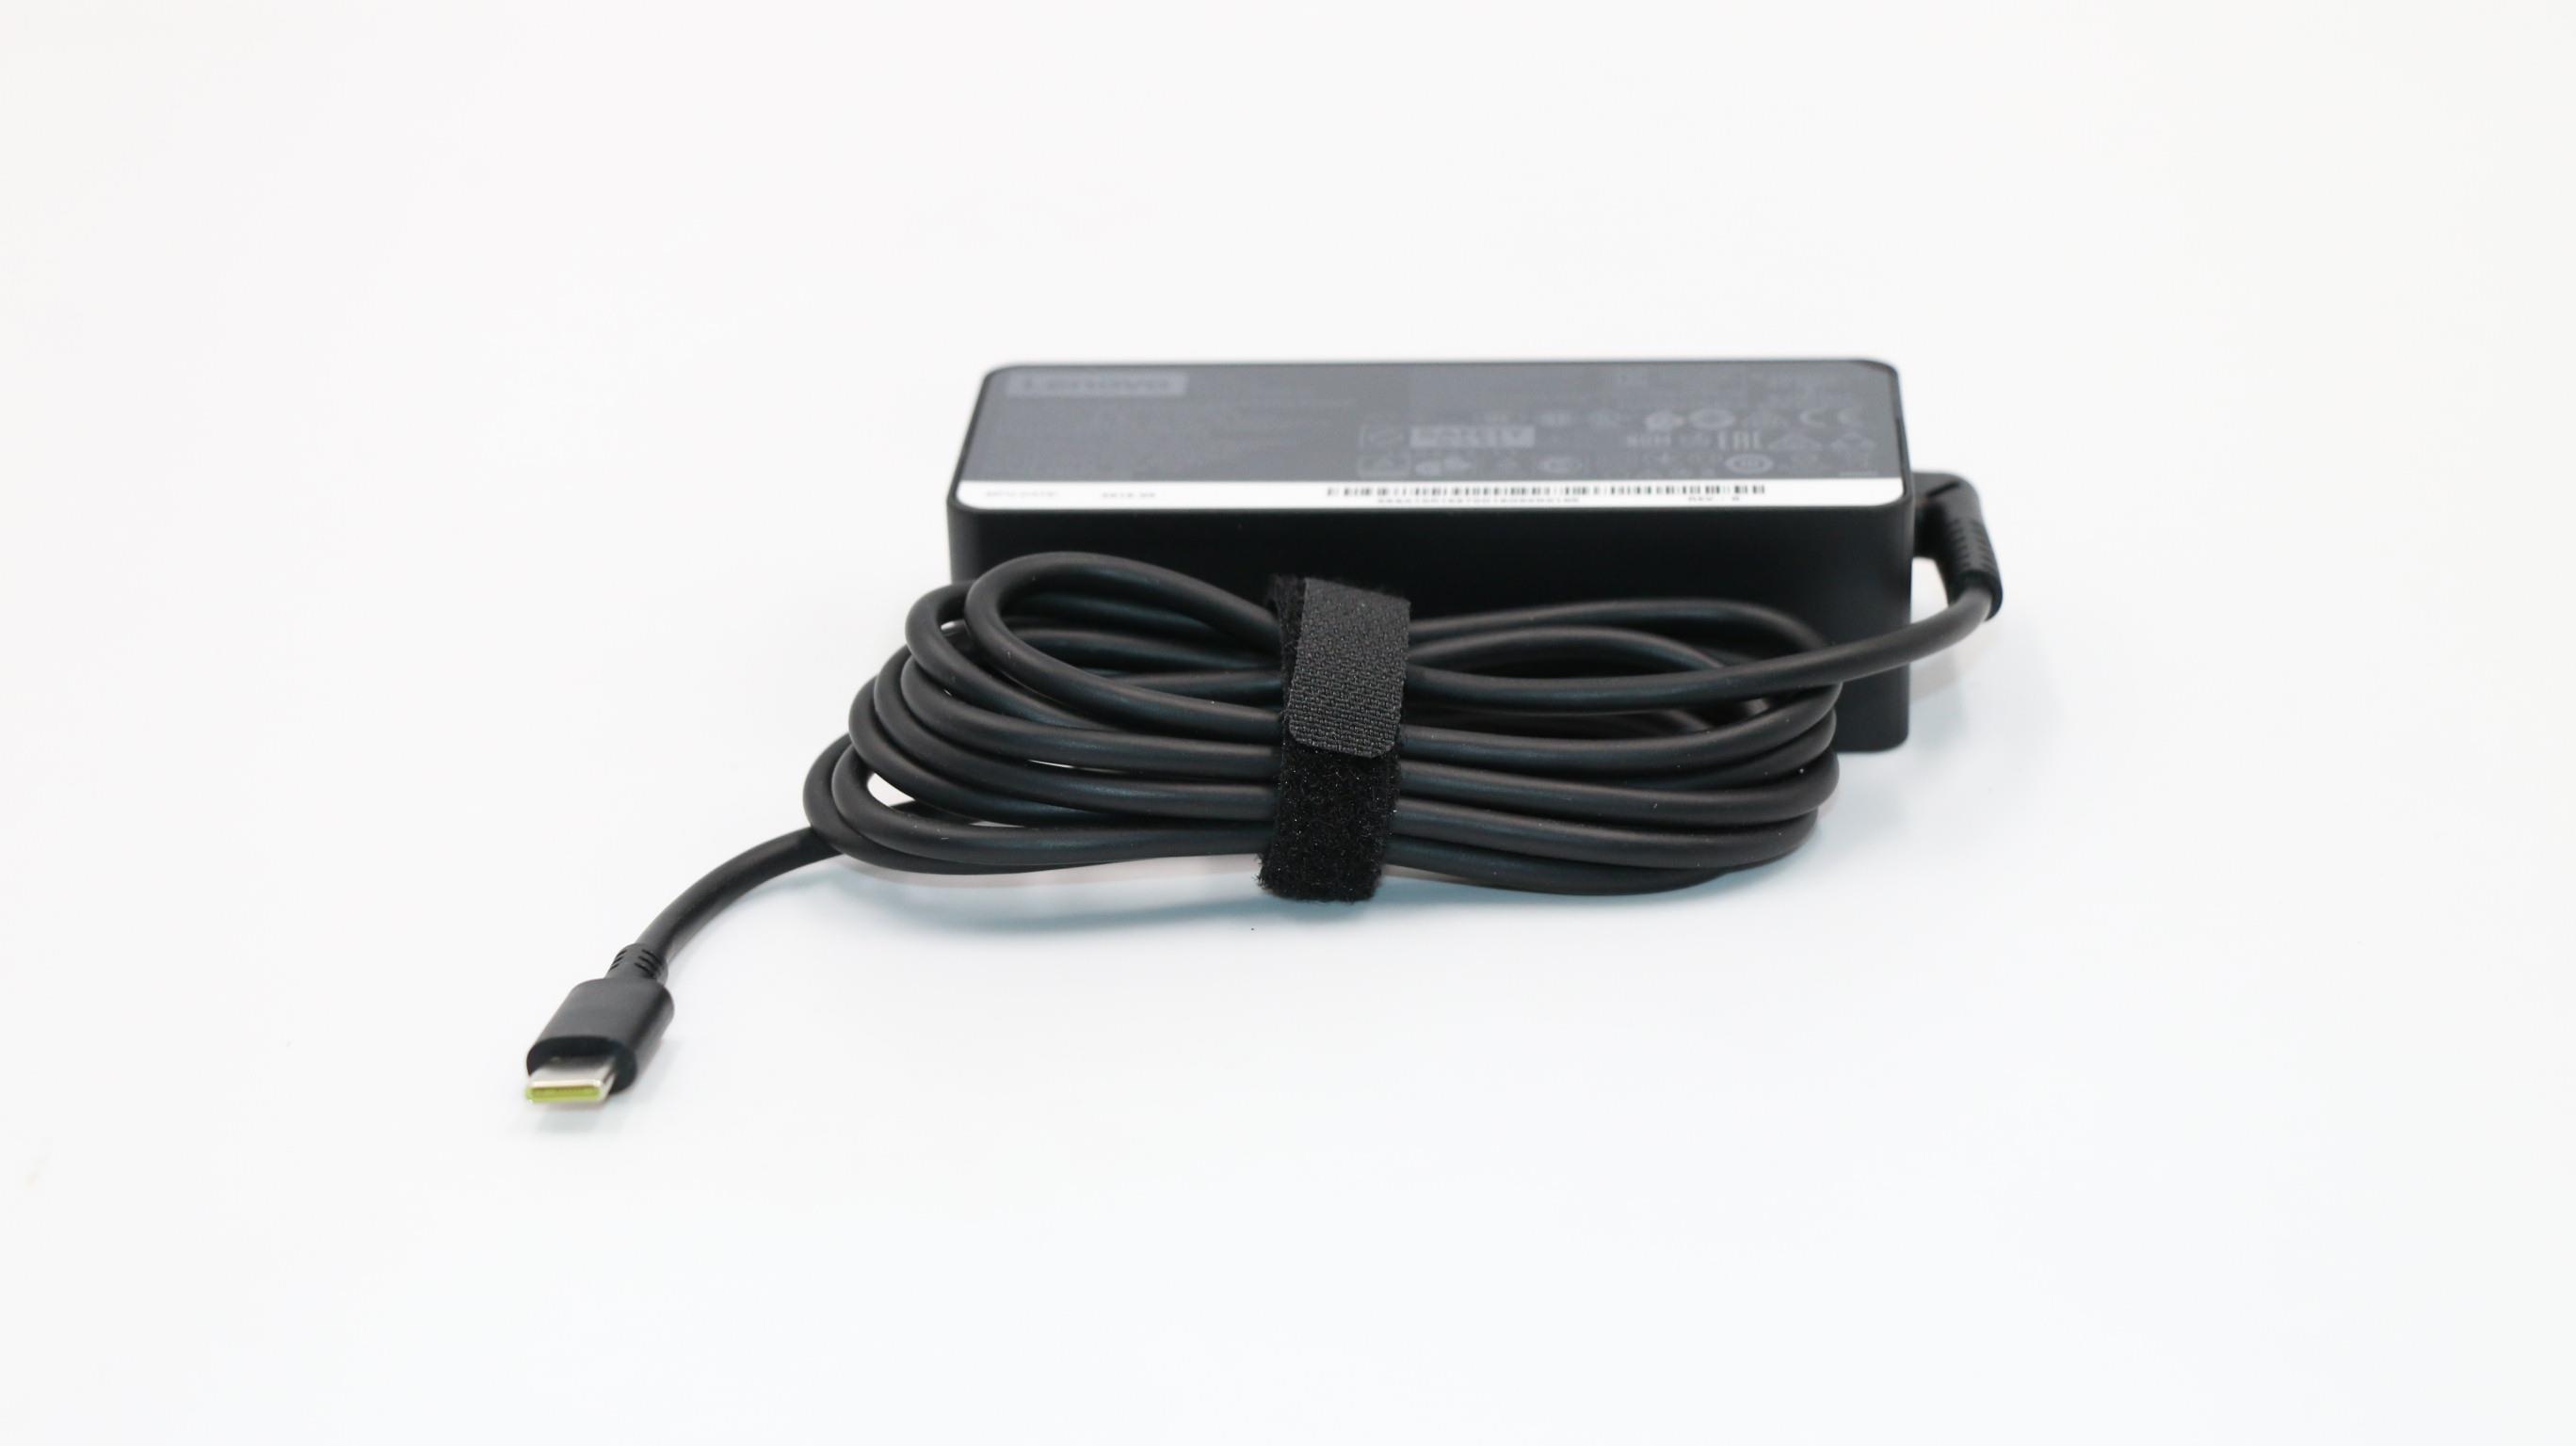 Lenovo Part 02DL124 Lenovo 65W USB-C Charger AC Adapter (USB Type-C), 20V, 3.25A, ADLX65YDC3D SA10R16870 (Include PowerCord)